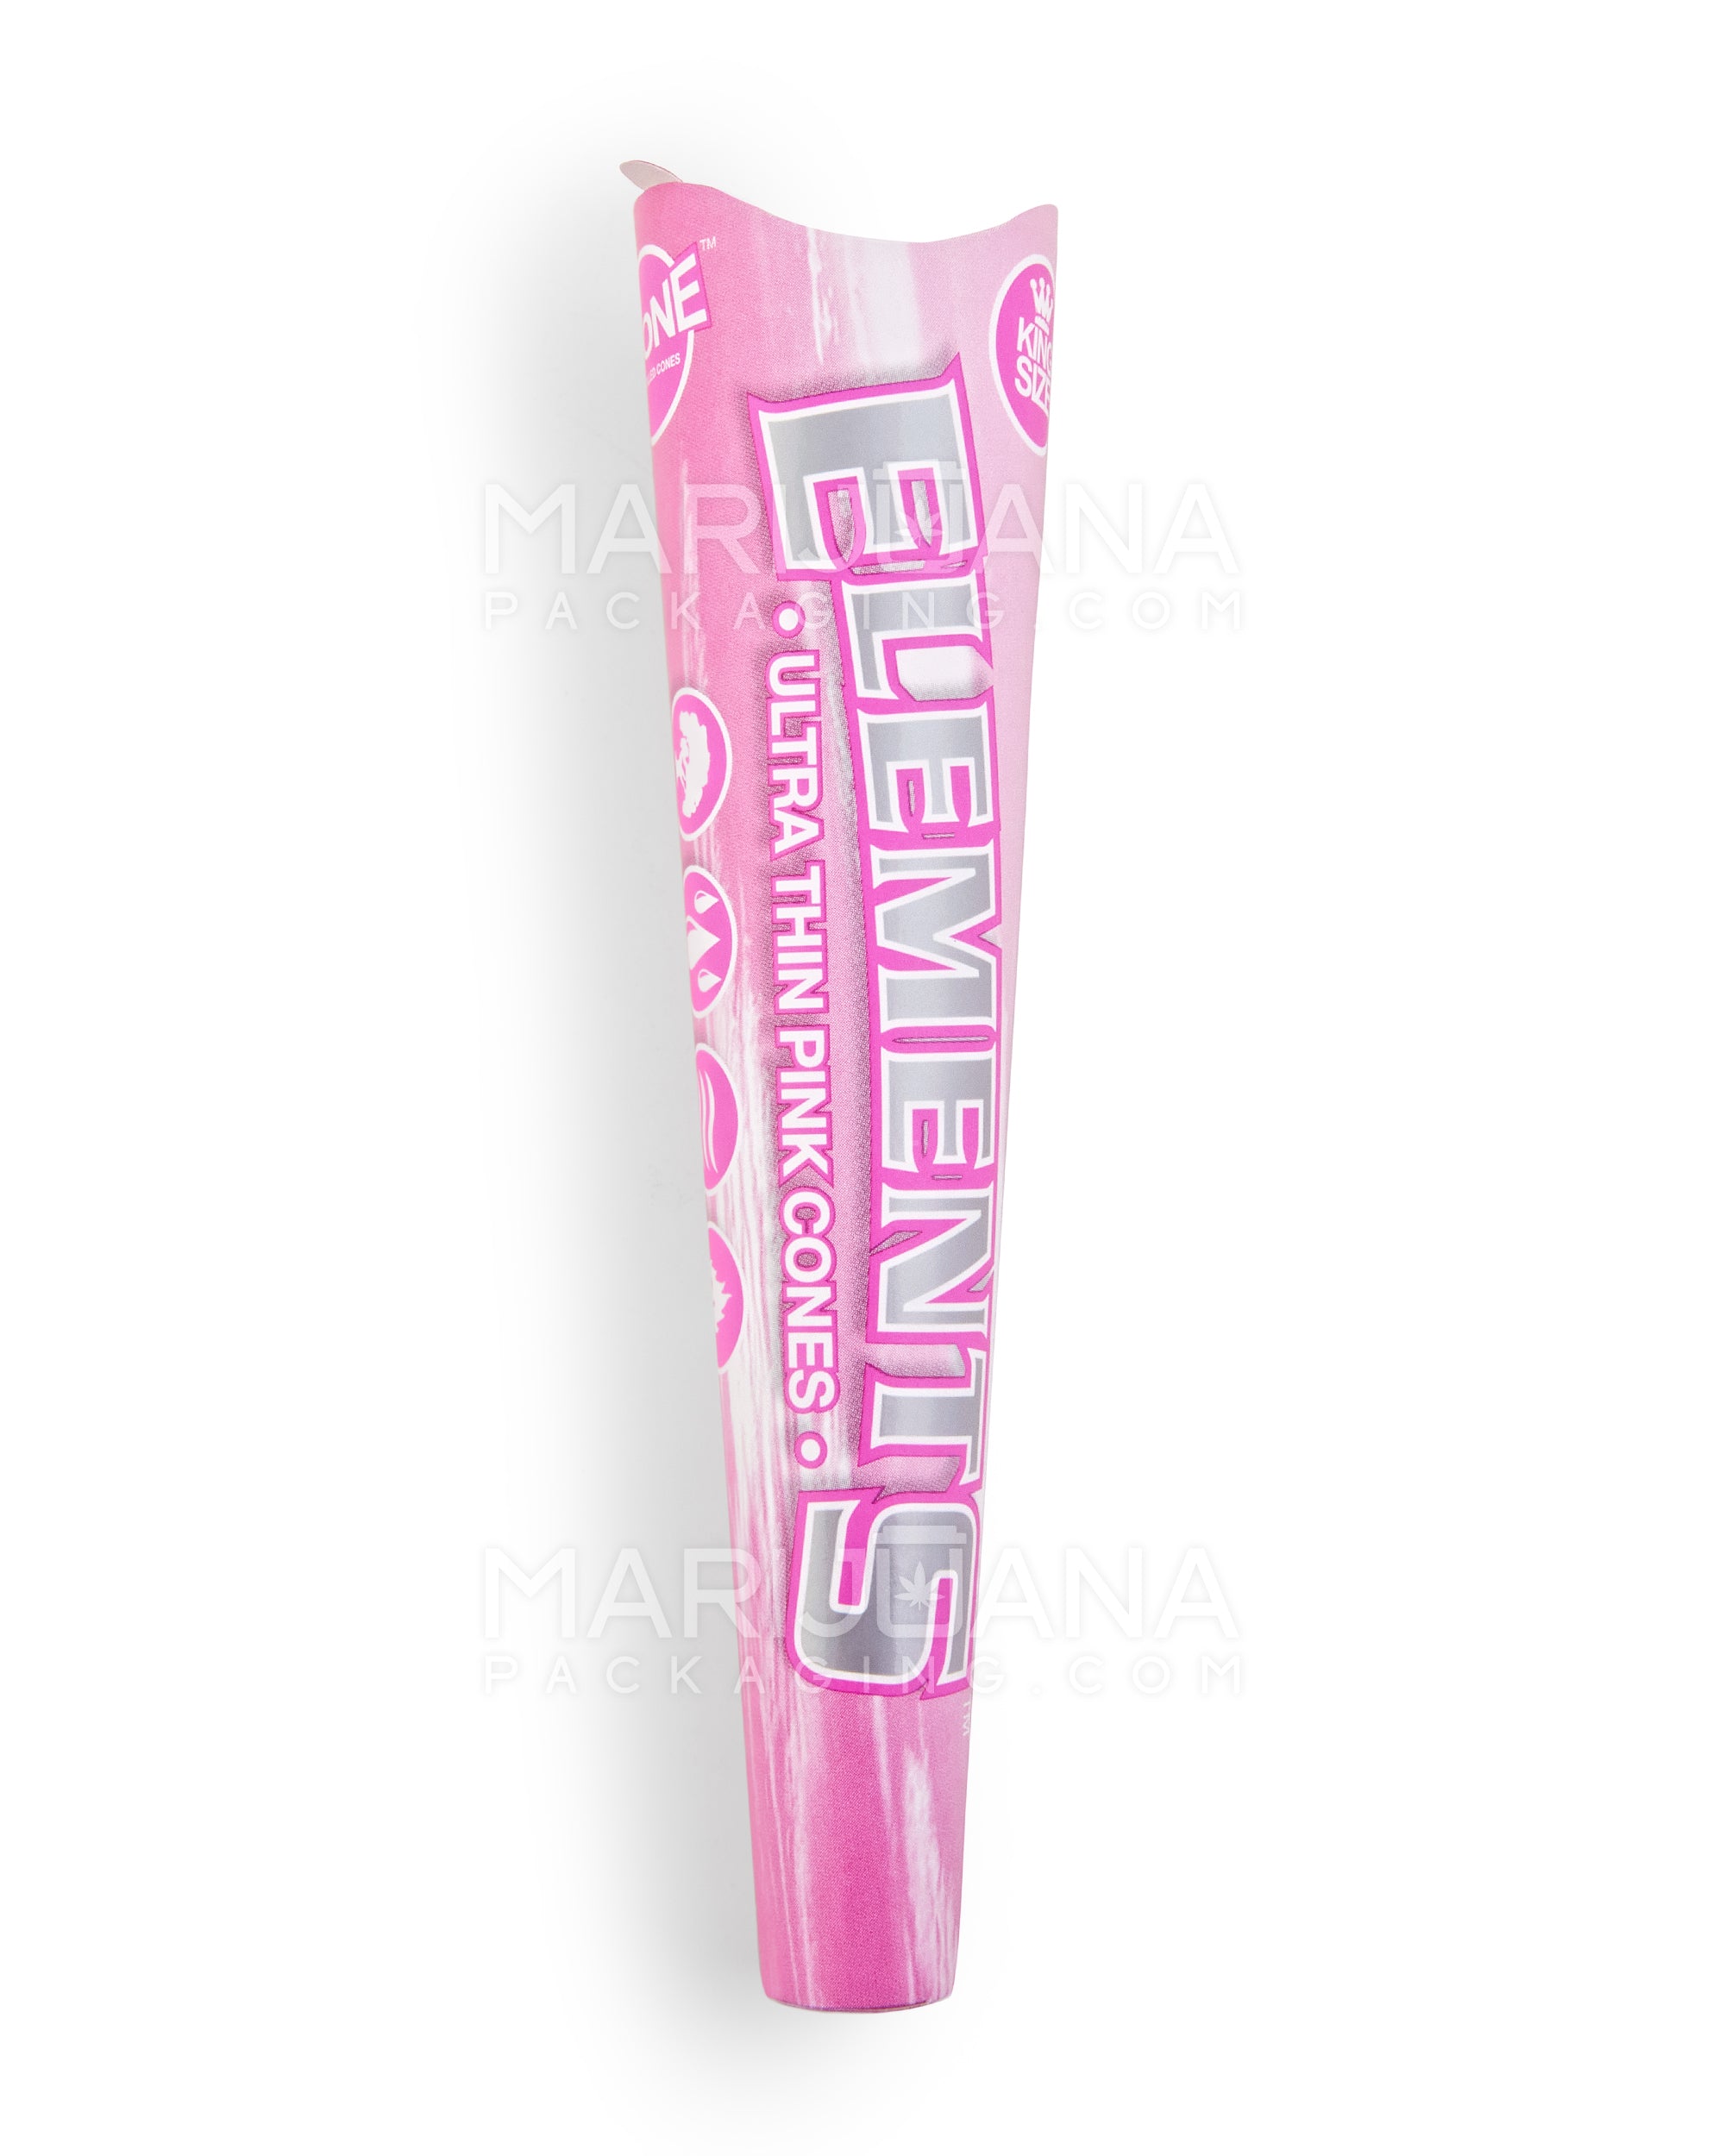 ELEMENTS | 'Retail Display' King Size Ultra Thin Pre-Rolled Cones | 109mm - Pink Rice Paper - 32 Count - 2